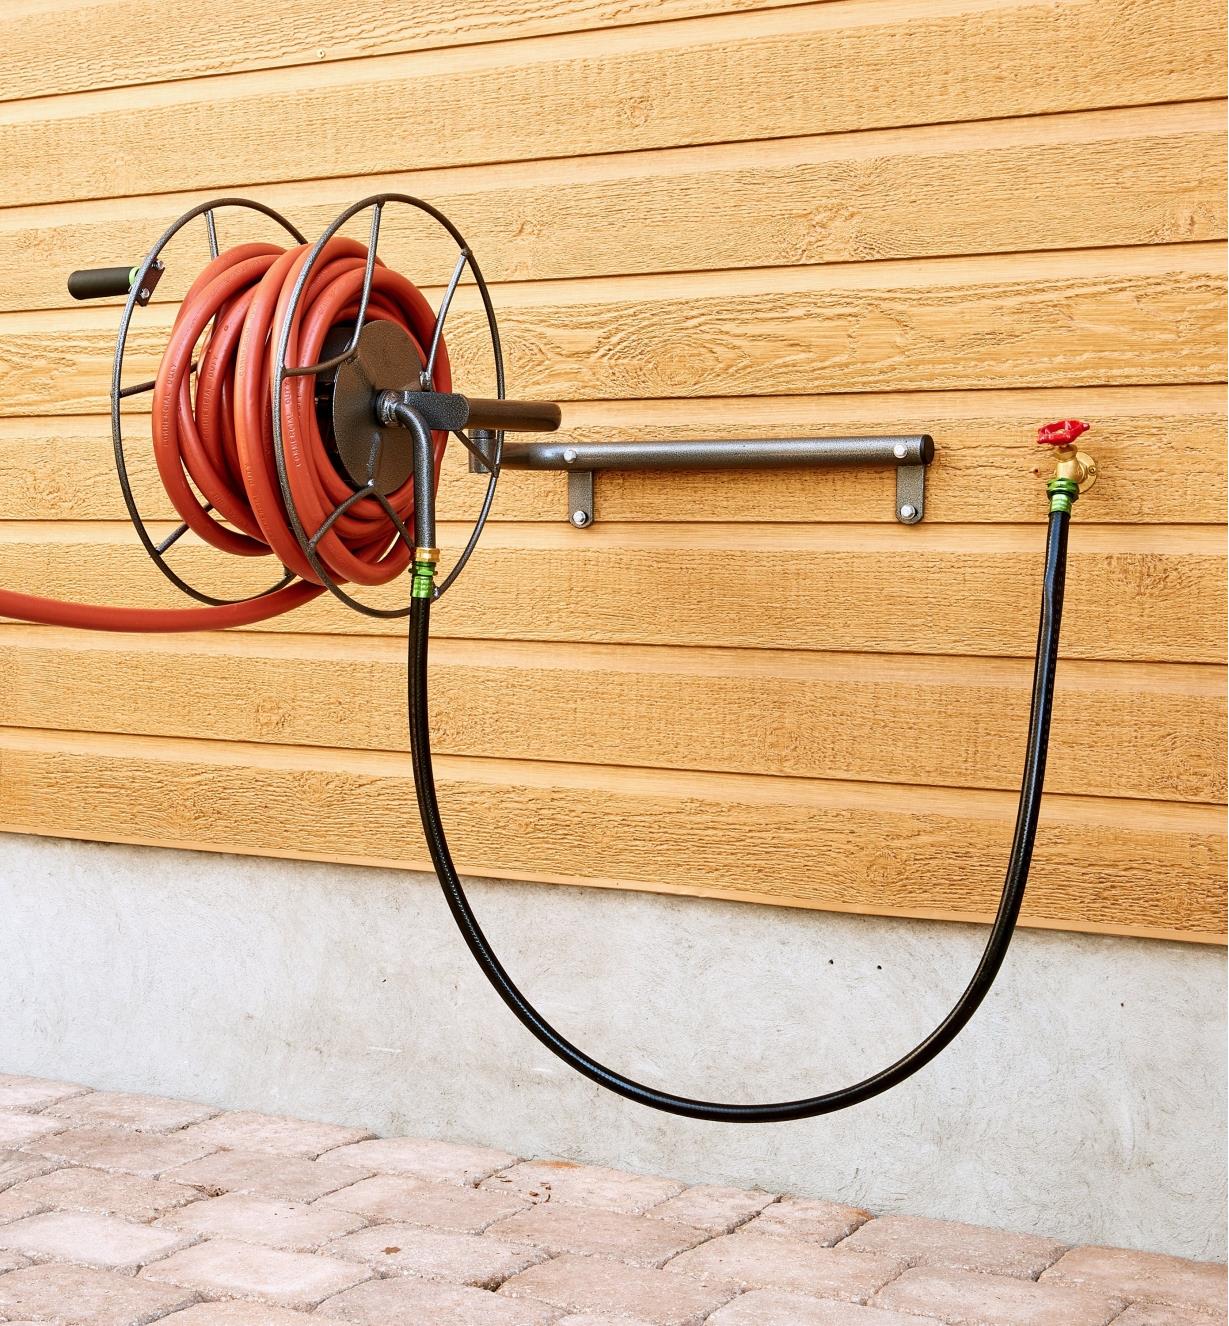 Hose Reel holding a hose, mounted on a wall in the open position